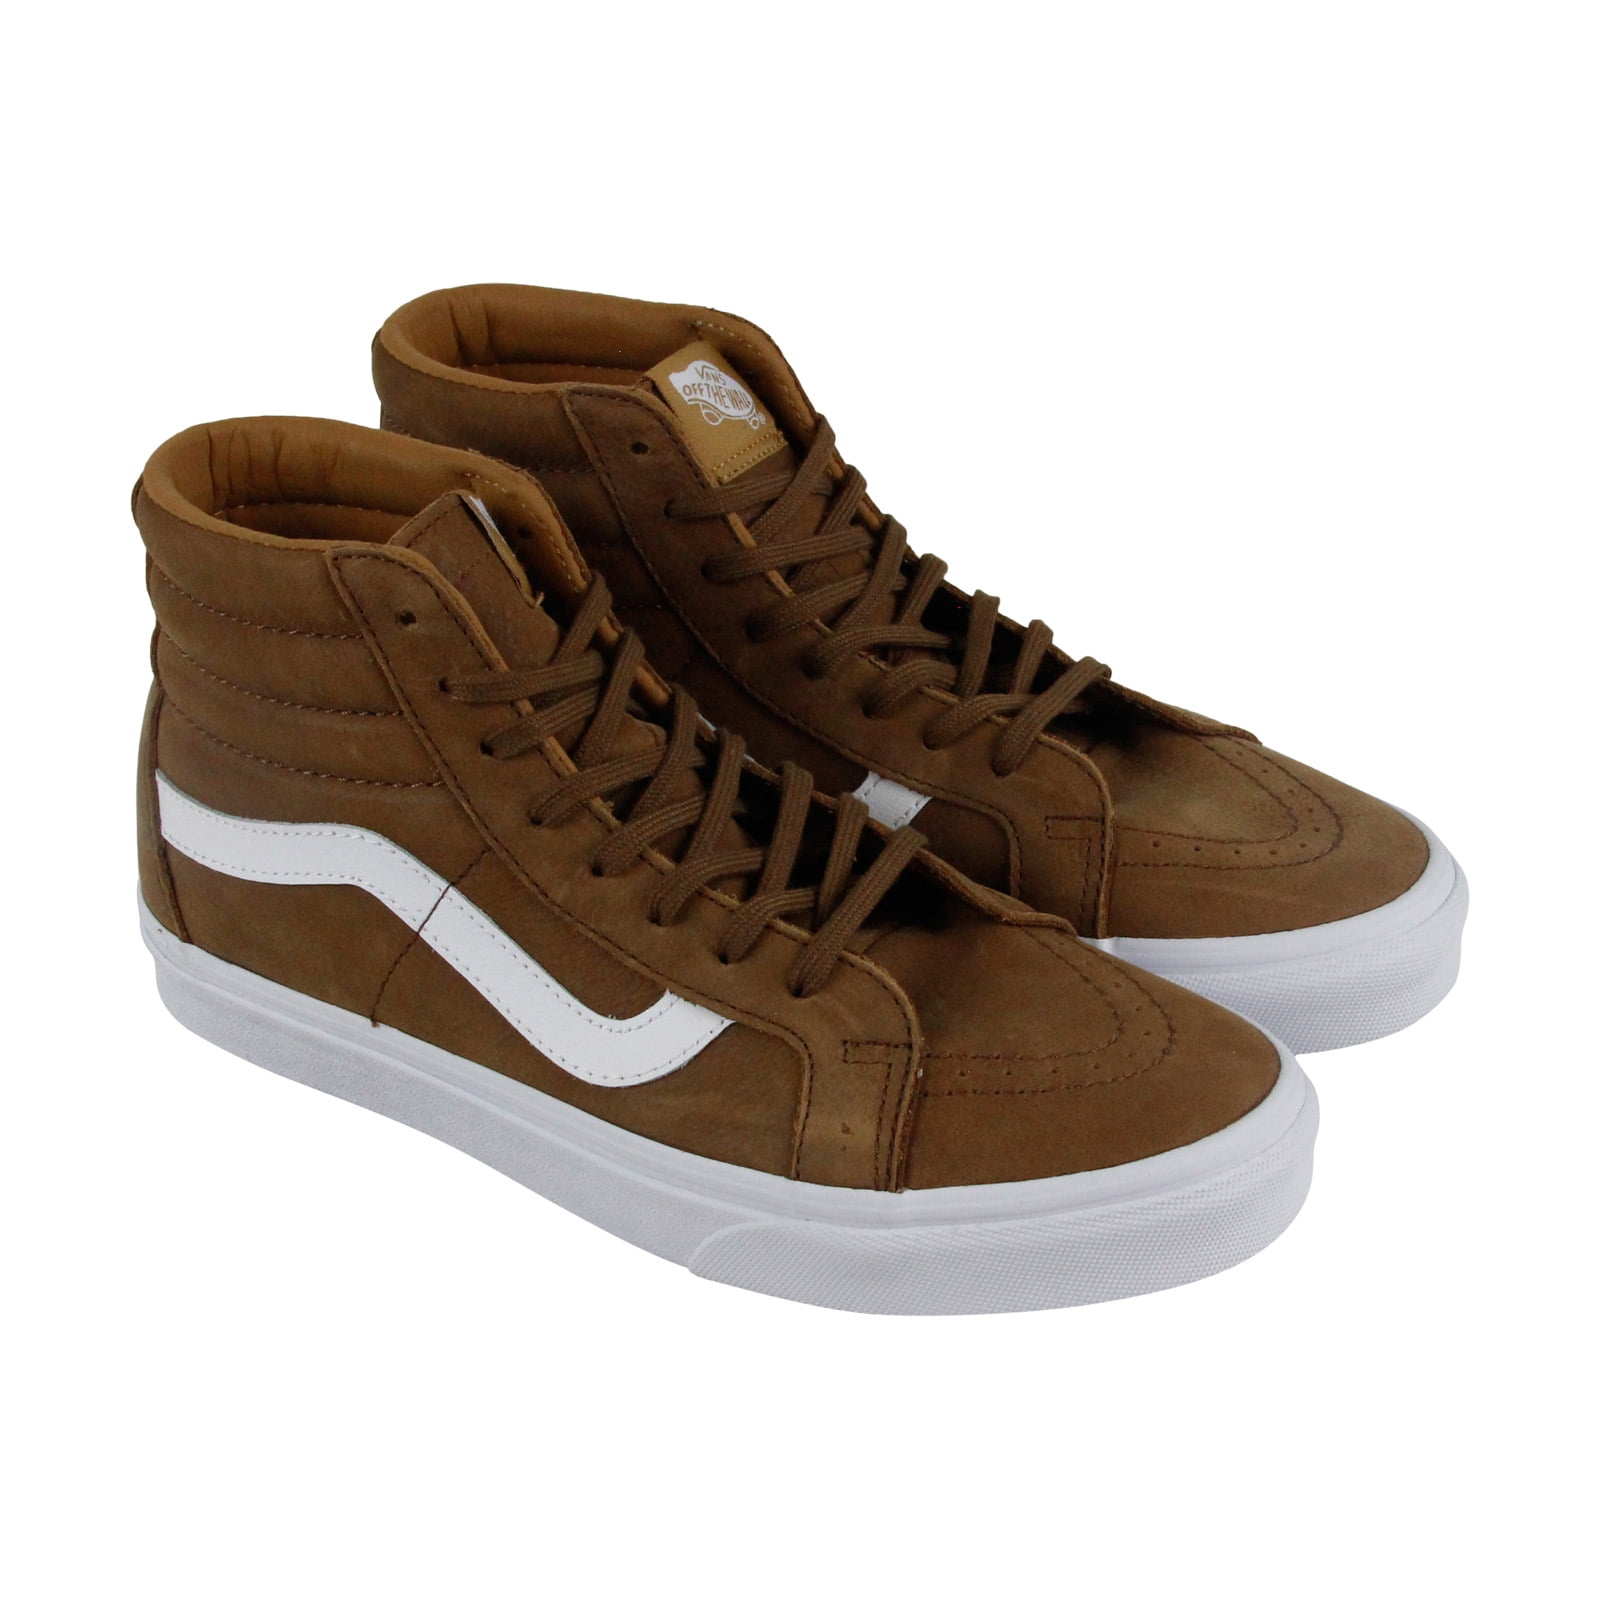 Vans Sk8 Hi Reissue Mens Brown Leather High Top Lace Up Sneakers Shoes ...